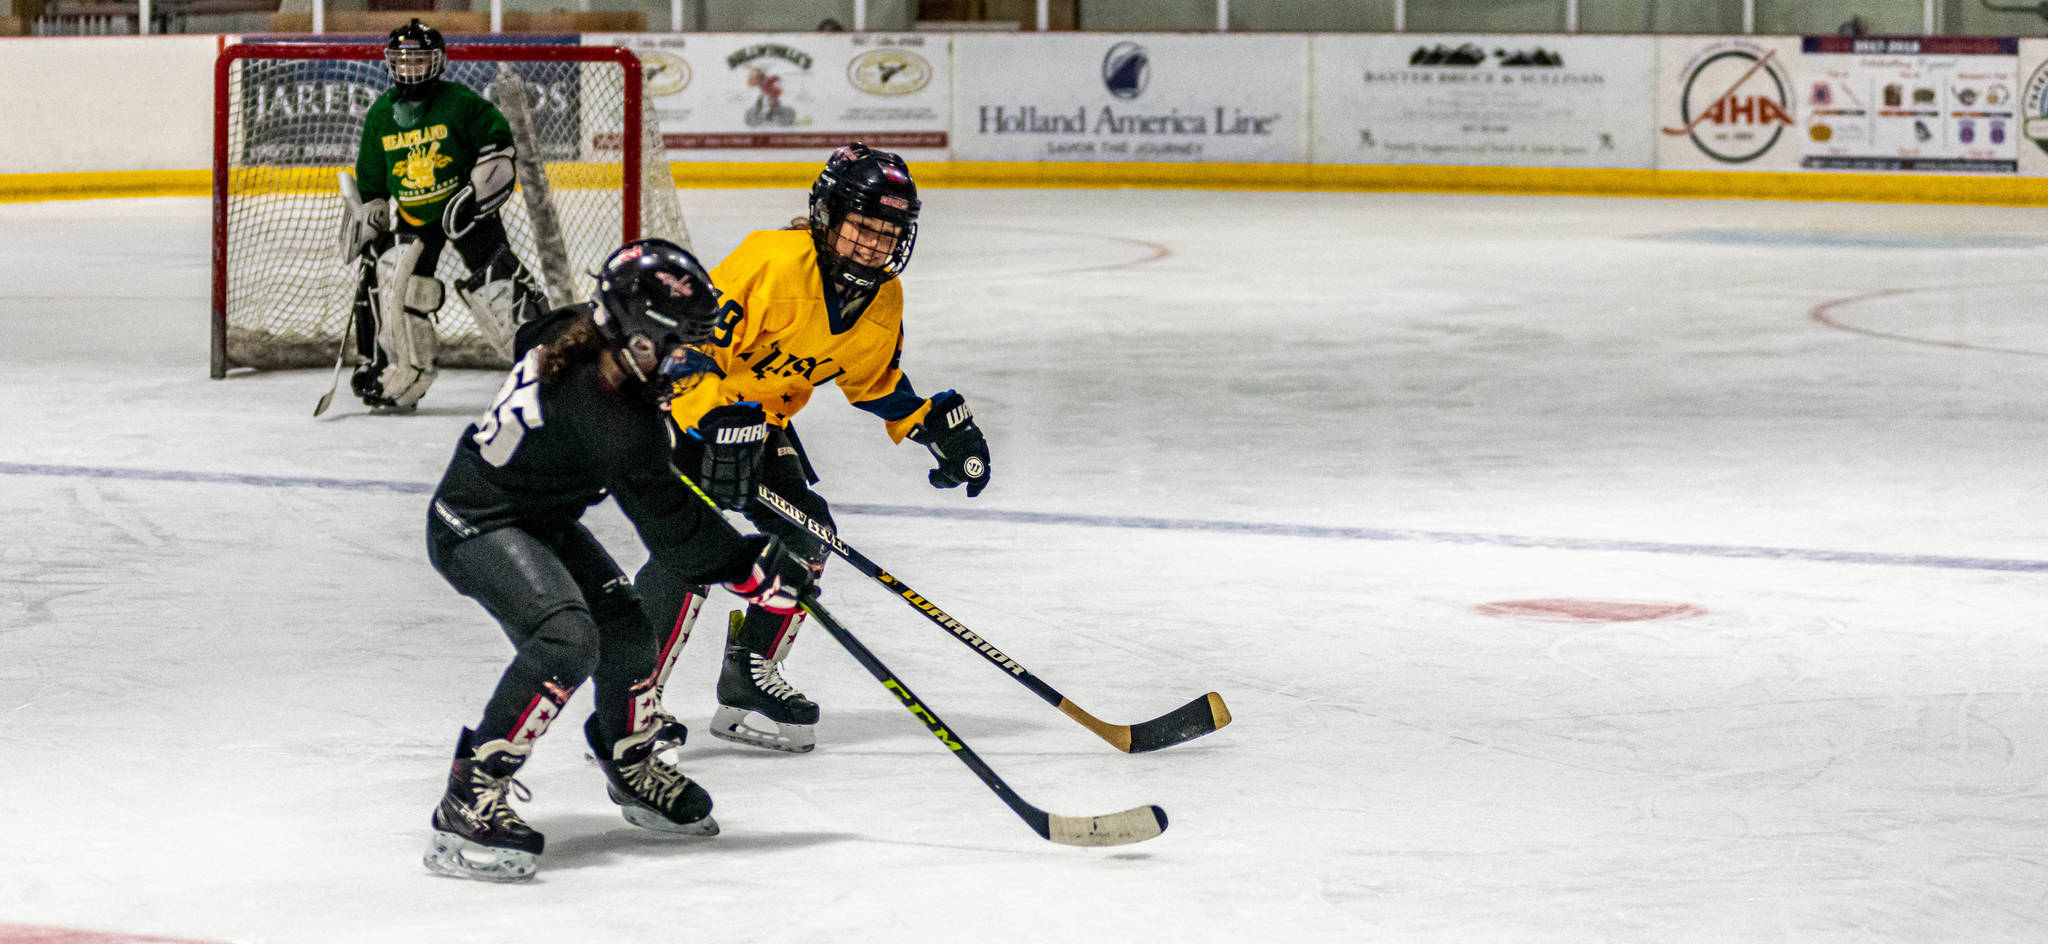 Two players competing in the 12-and-under division race toward the puck in a recent pre-season workout at Treadwell Ice Arena.